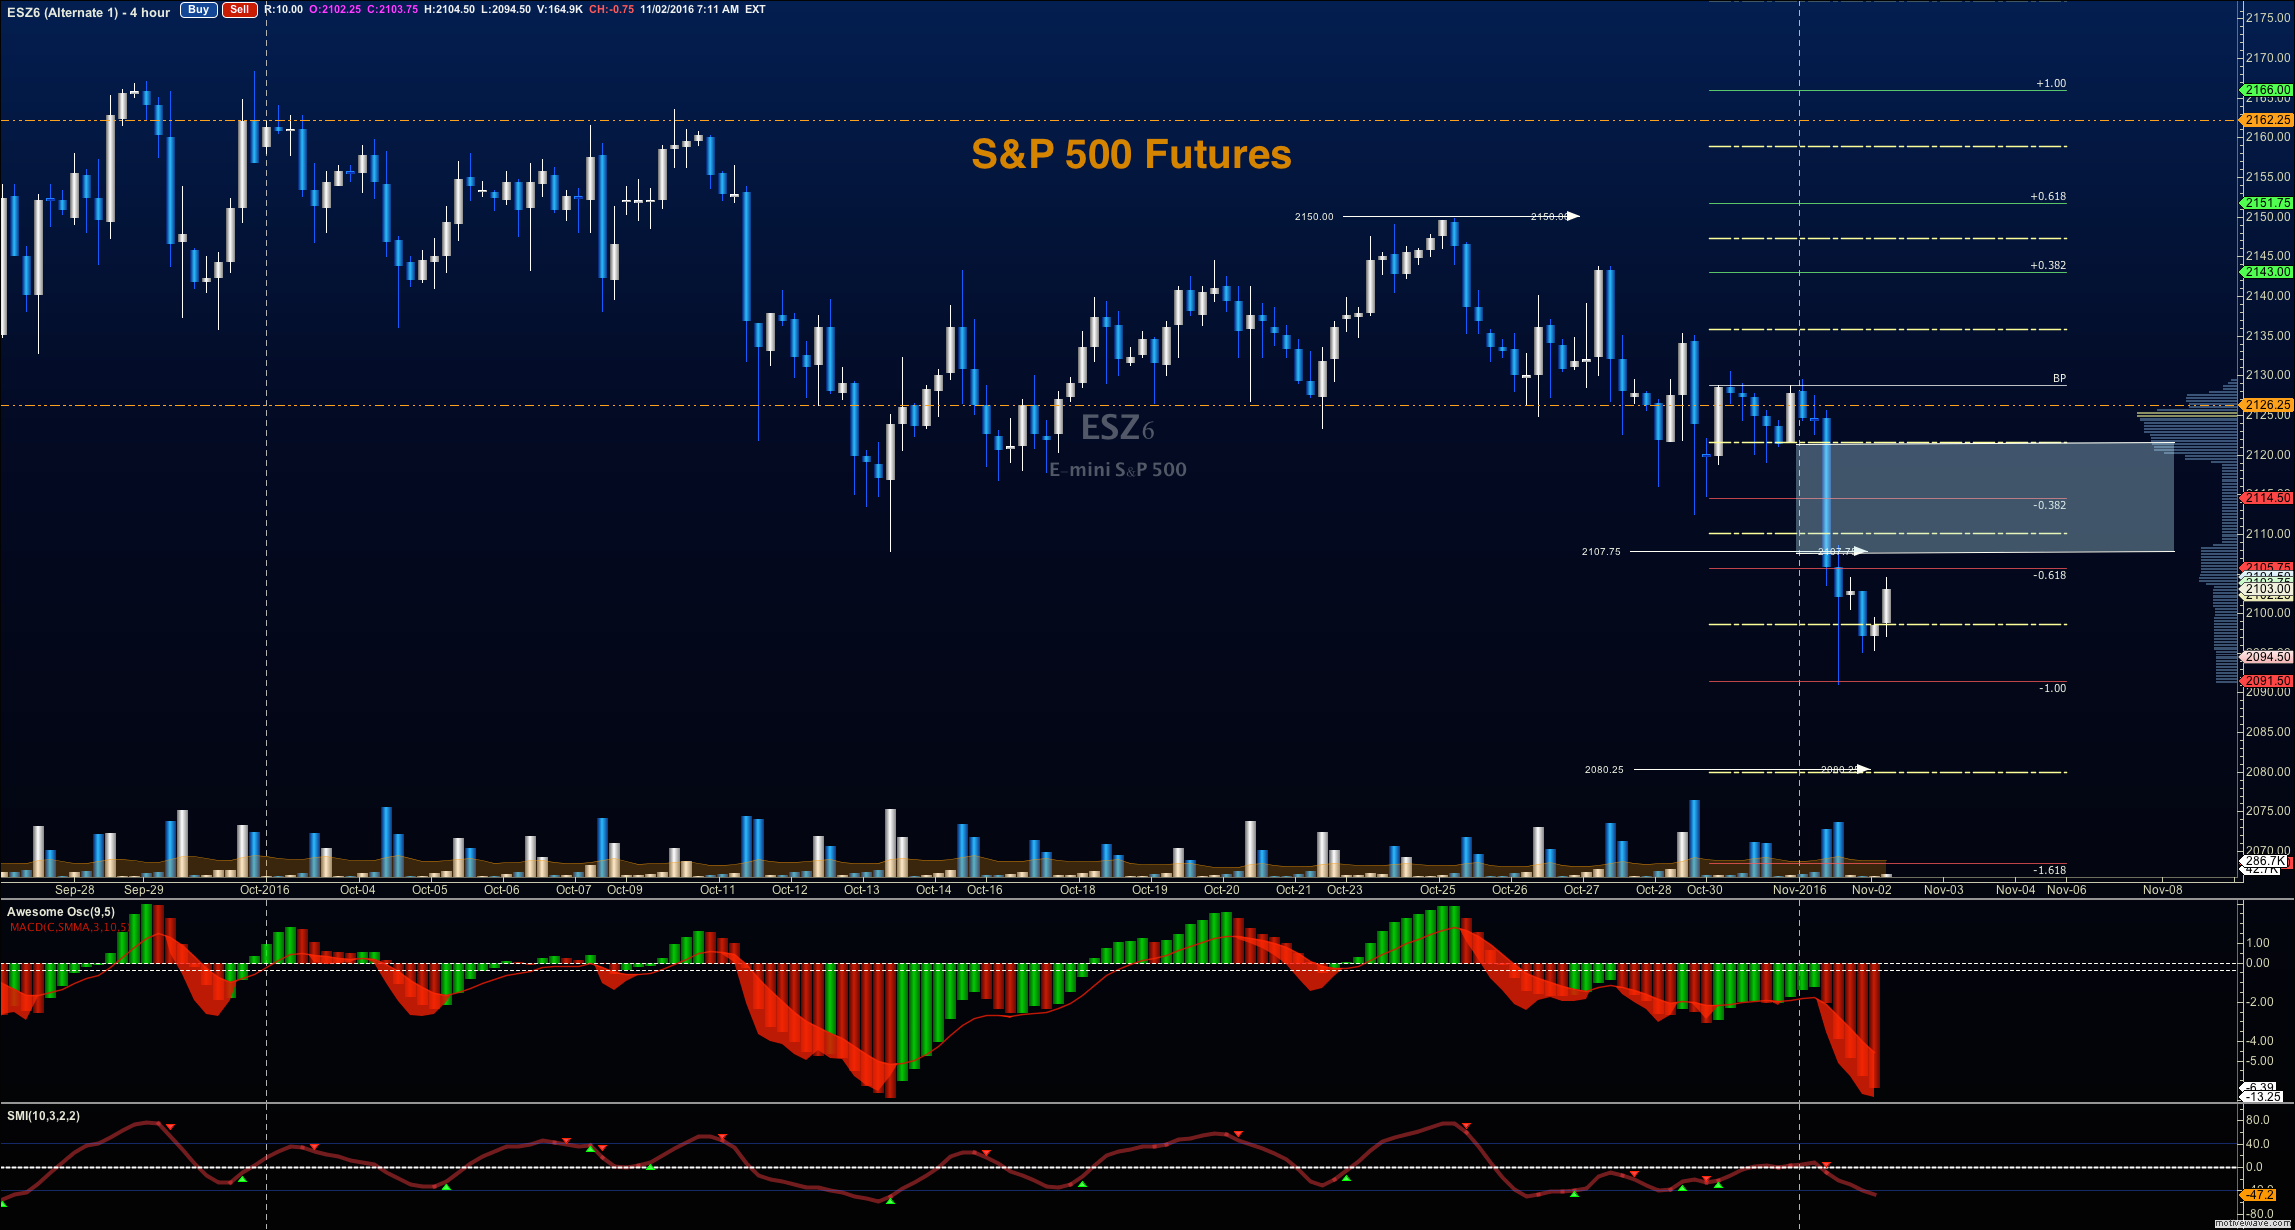 S&P 500 Futures Trading Outlook For November 2